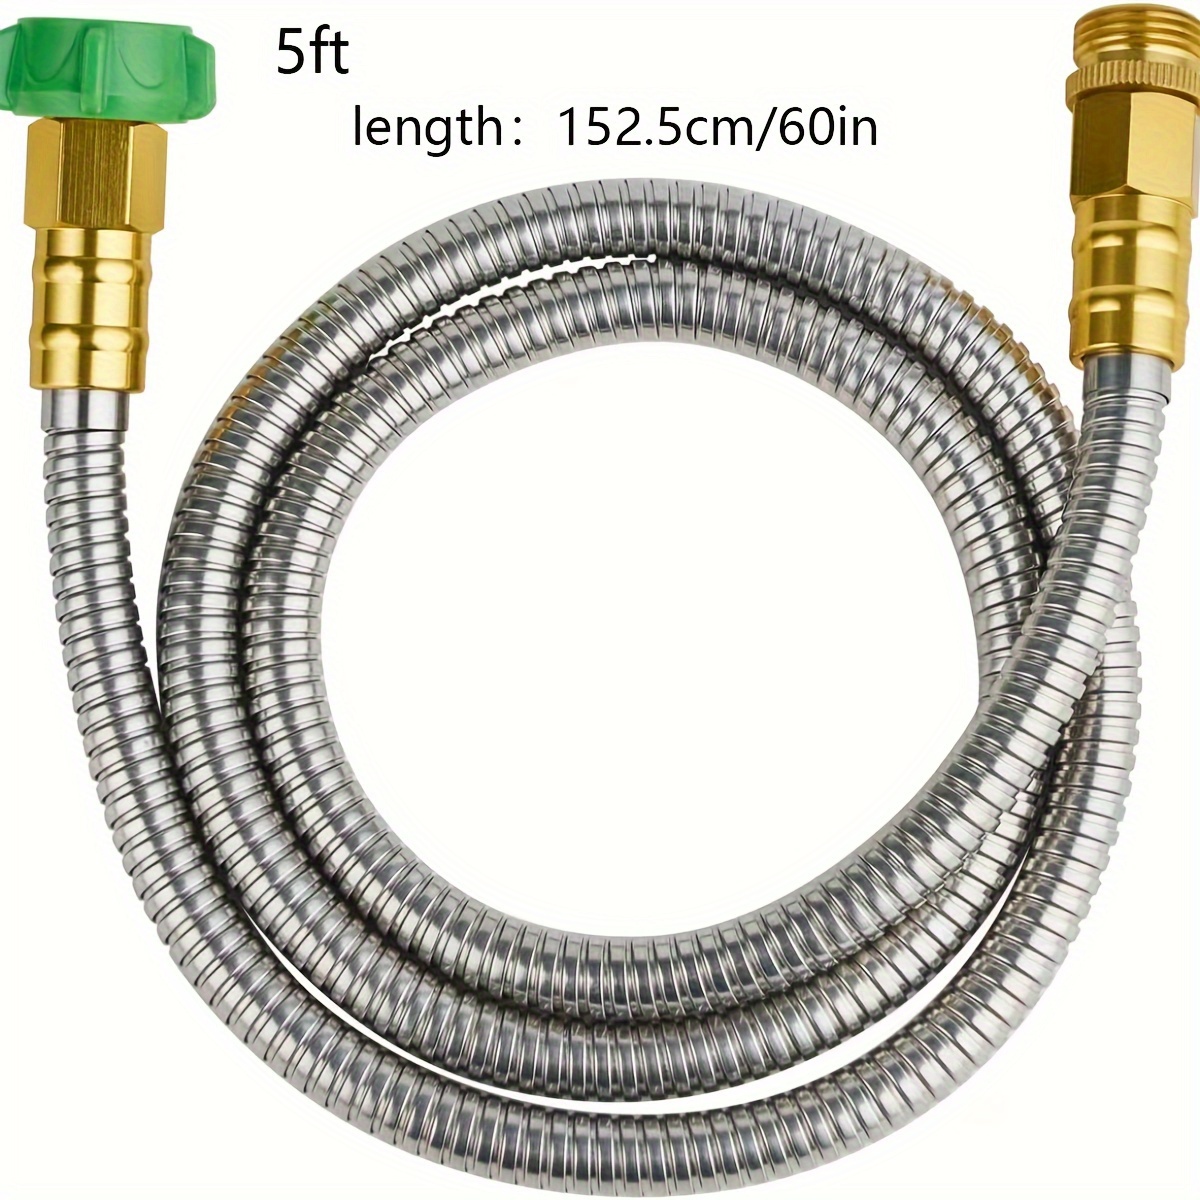 50 Foot Garden Hose Stainless Steel Metal Water Hose Tough & Flexible,  Lightweight, Crush Resistant Aluminum Fittings, Kink & Tangle Free, Rust  Proof, Easy to Use & Store 